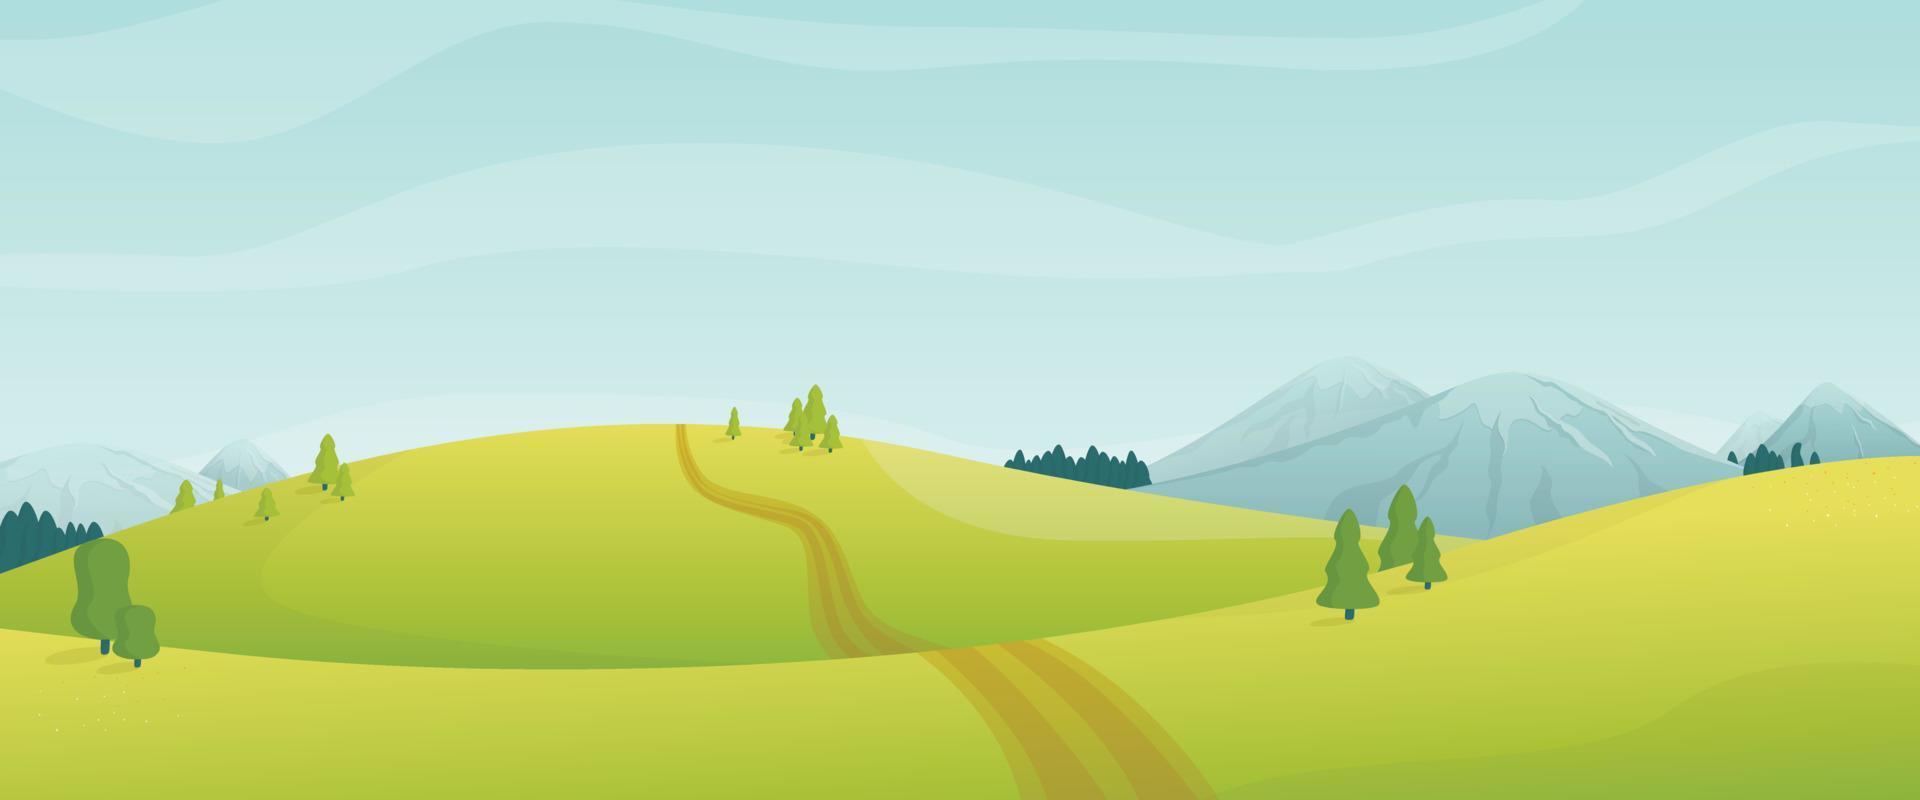 Cartoon panoramic view of summer day nature. Mountains, fields and hills with snow-capped peaks, trees, firs. A path leading off into the distance. vector